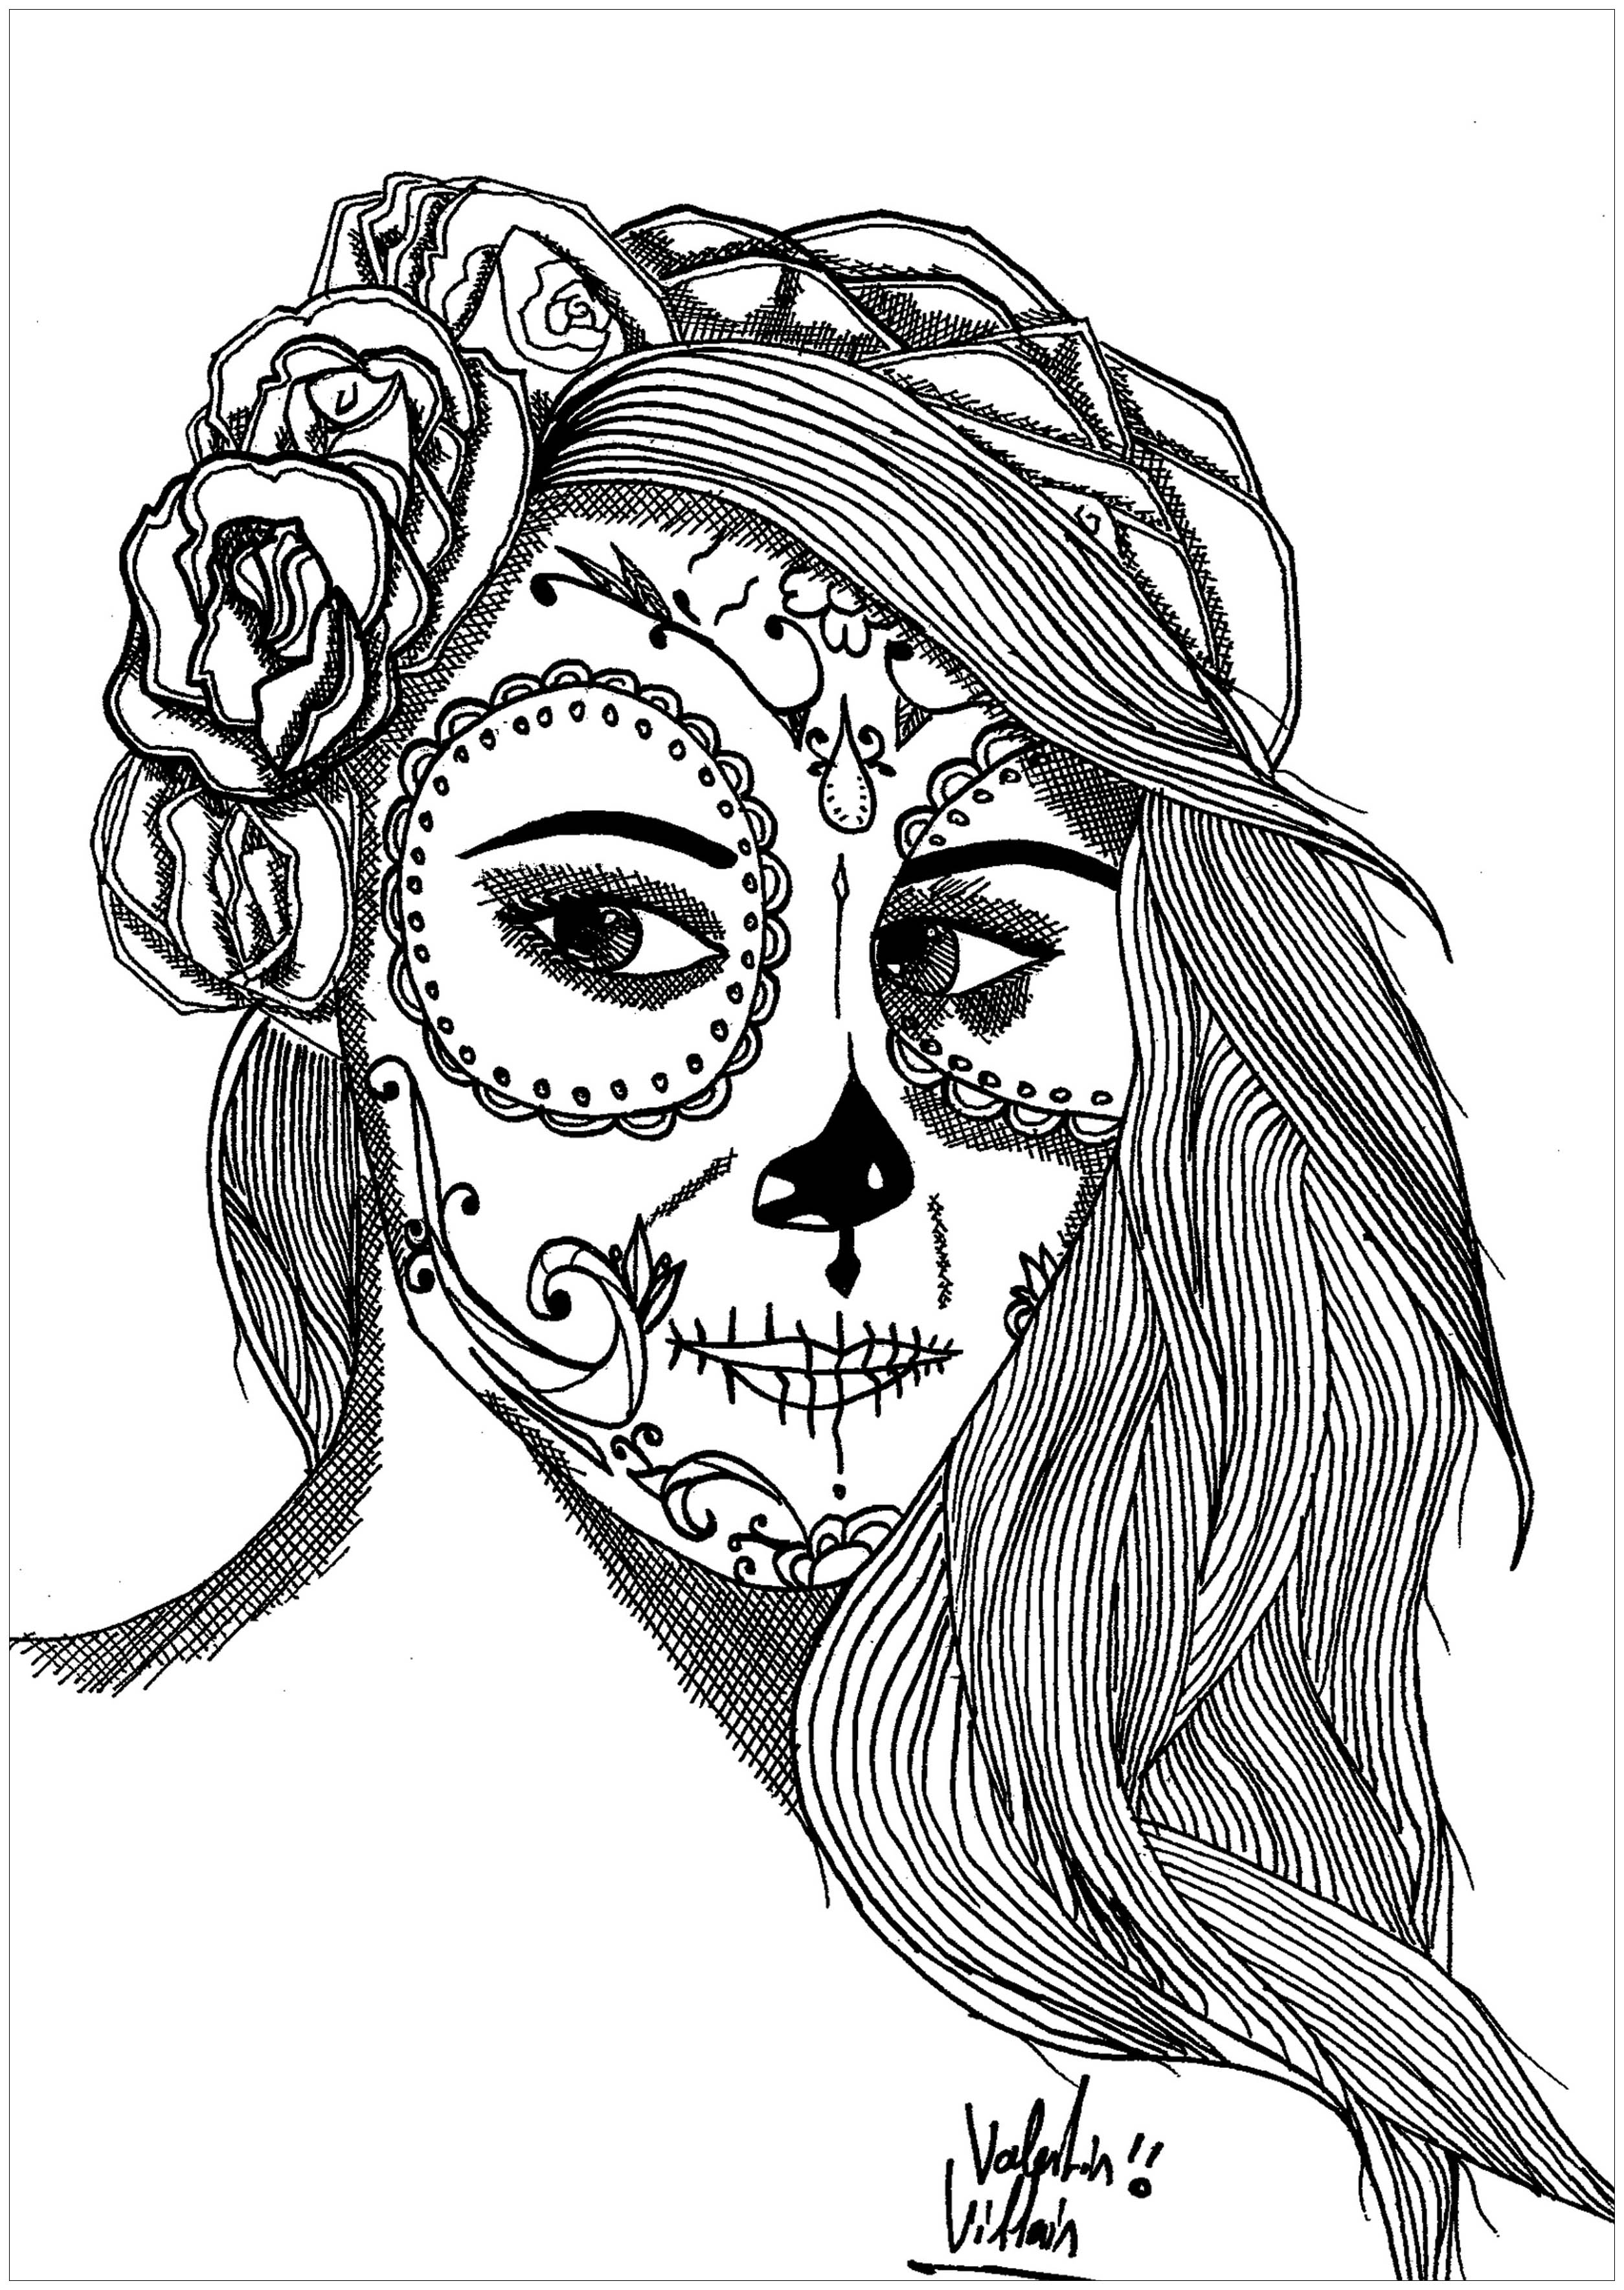 Coloring page representing a woman with a makeup inspired by the Mexican holiday celebrated 'Día de los Muertos', Artist : Valentin